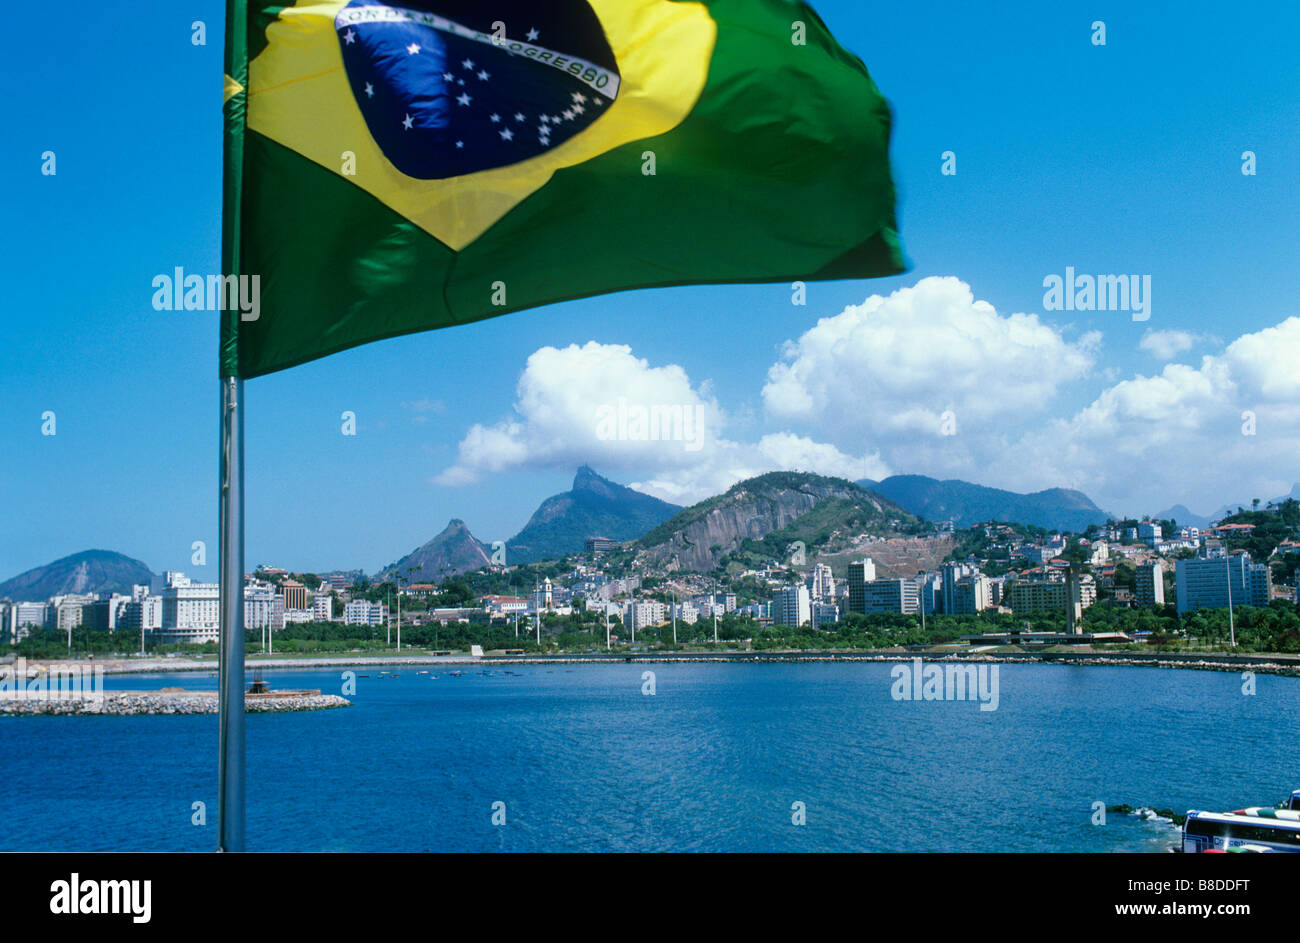 Rio de Janeiro, Brazil, under the national flag, famed for its Carnival, Corcovada Mountain Statue of Christ,Capital City Stock Photo